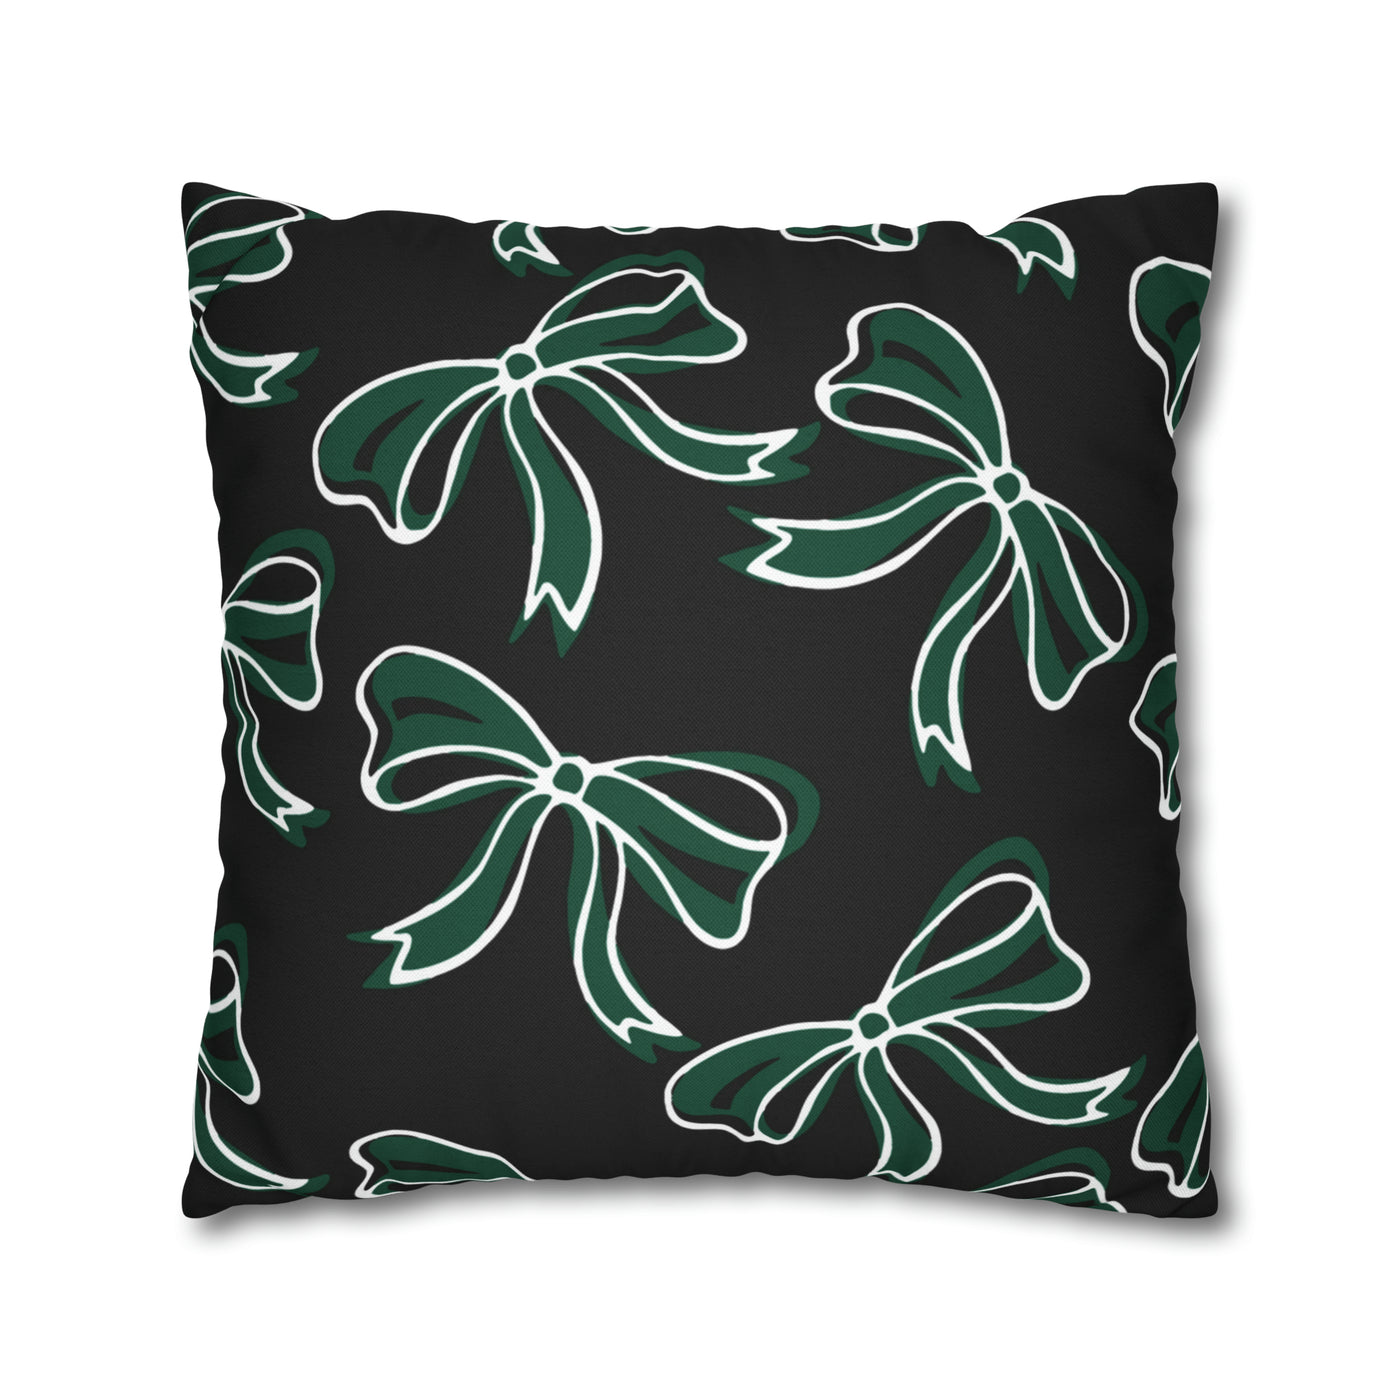 Trendy Bow College Pillow Cover - Dorm Pillow, Graduation Gift,Bed Party Gift,Acceptance Gift,College Gift, Michigan State, BING